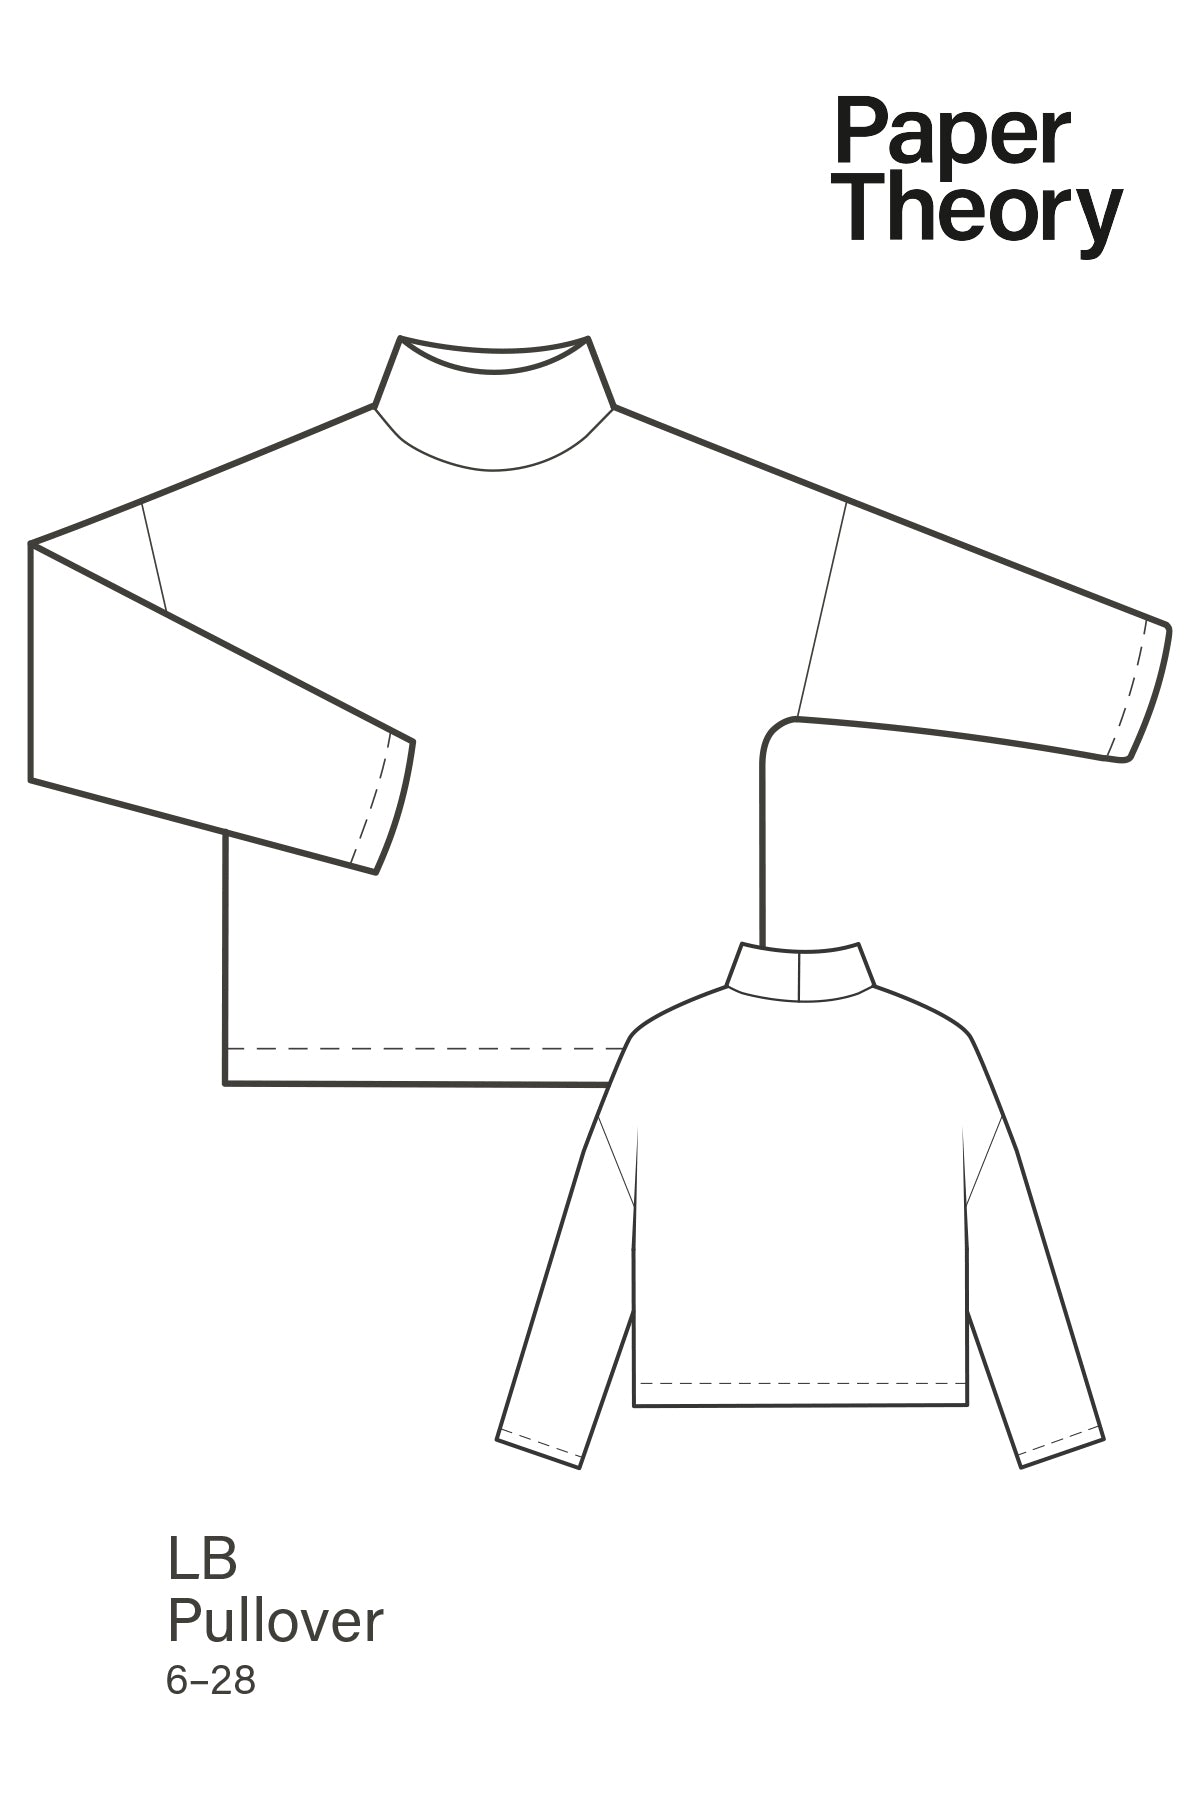 LB Pullover - Paper Theory